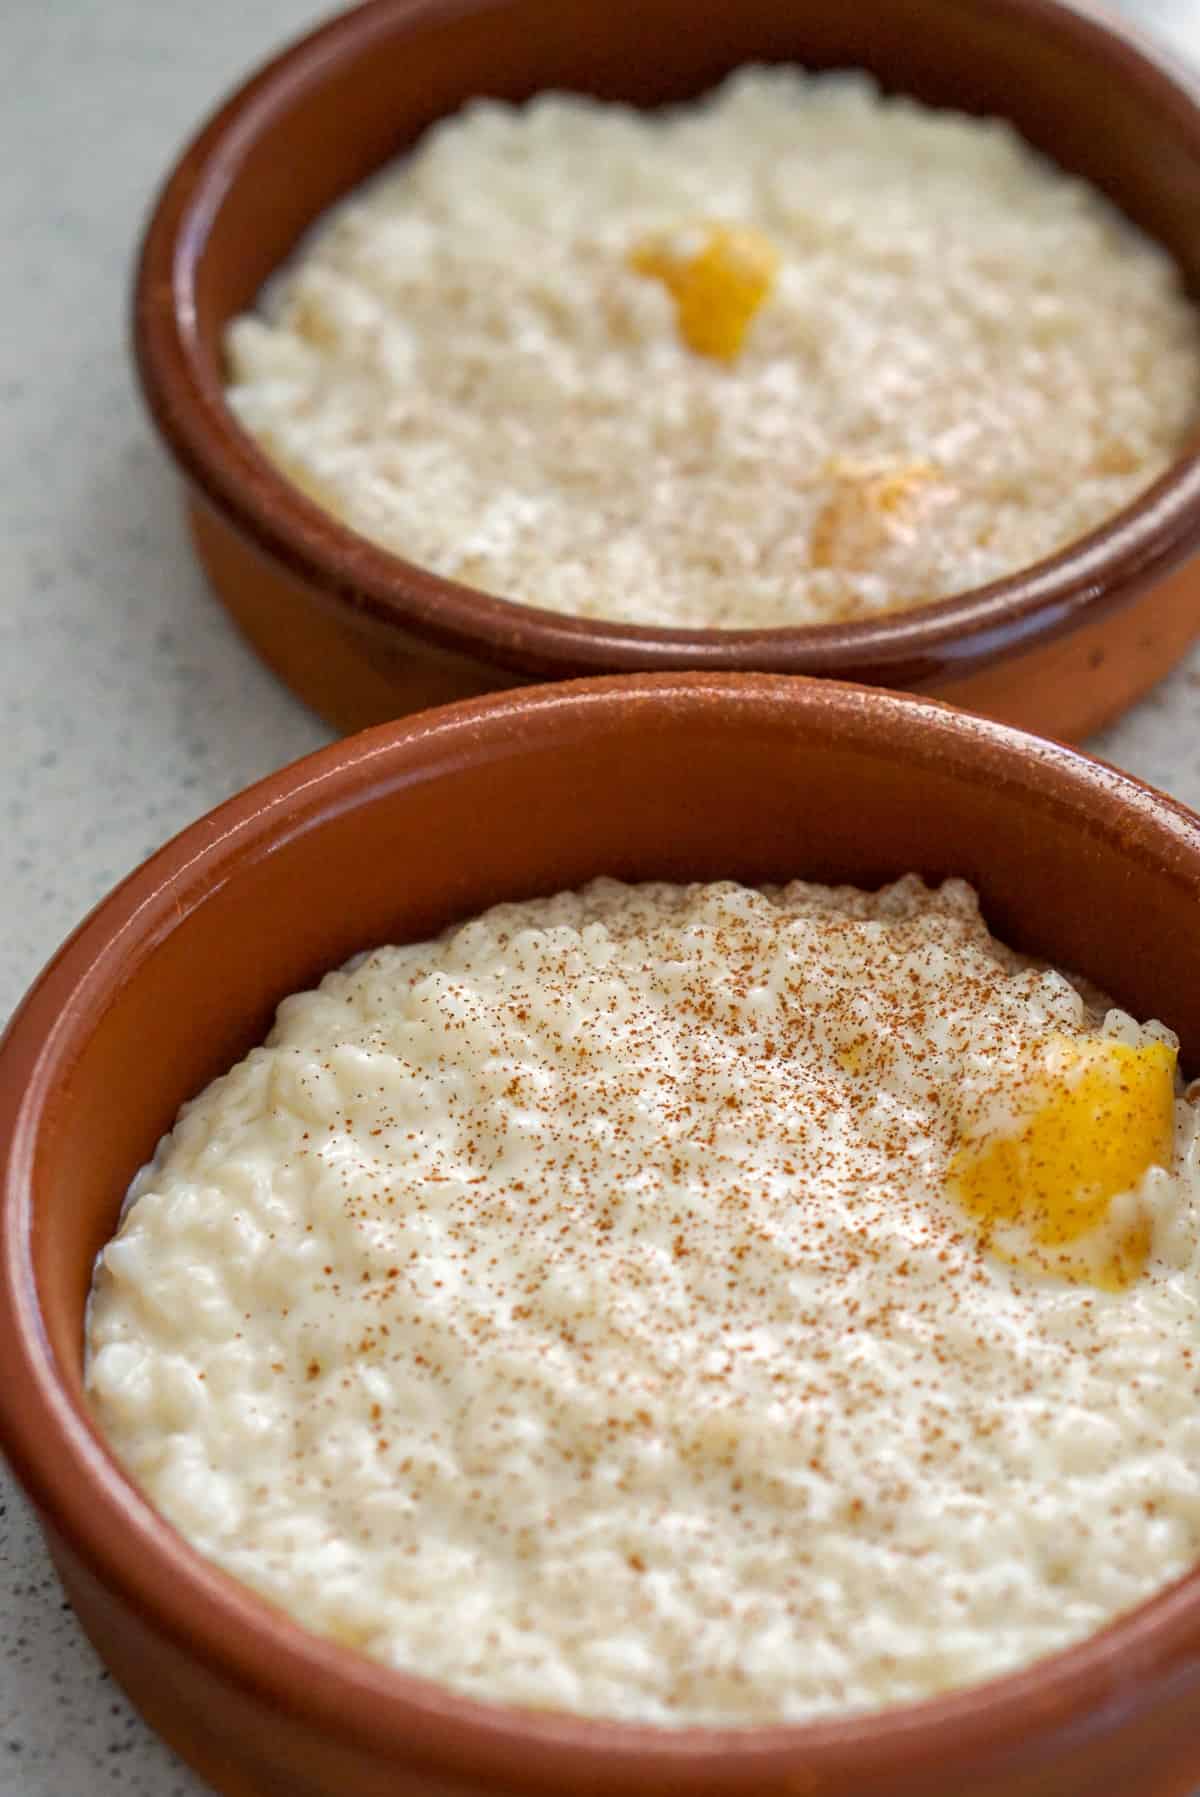 Two small clay dishes of rice pudding topped with cinnamon and a lemon peel